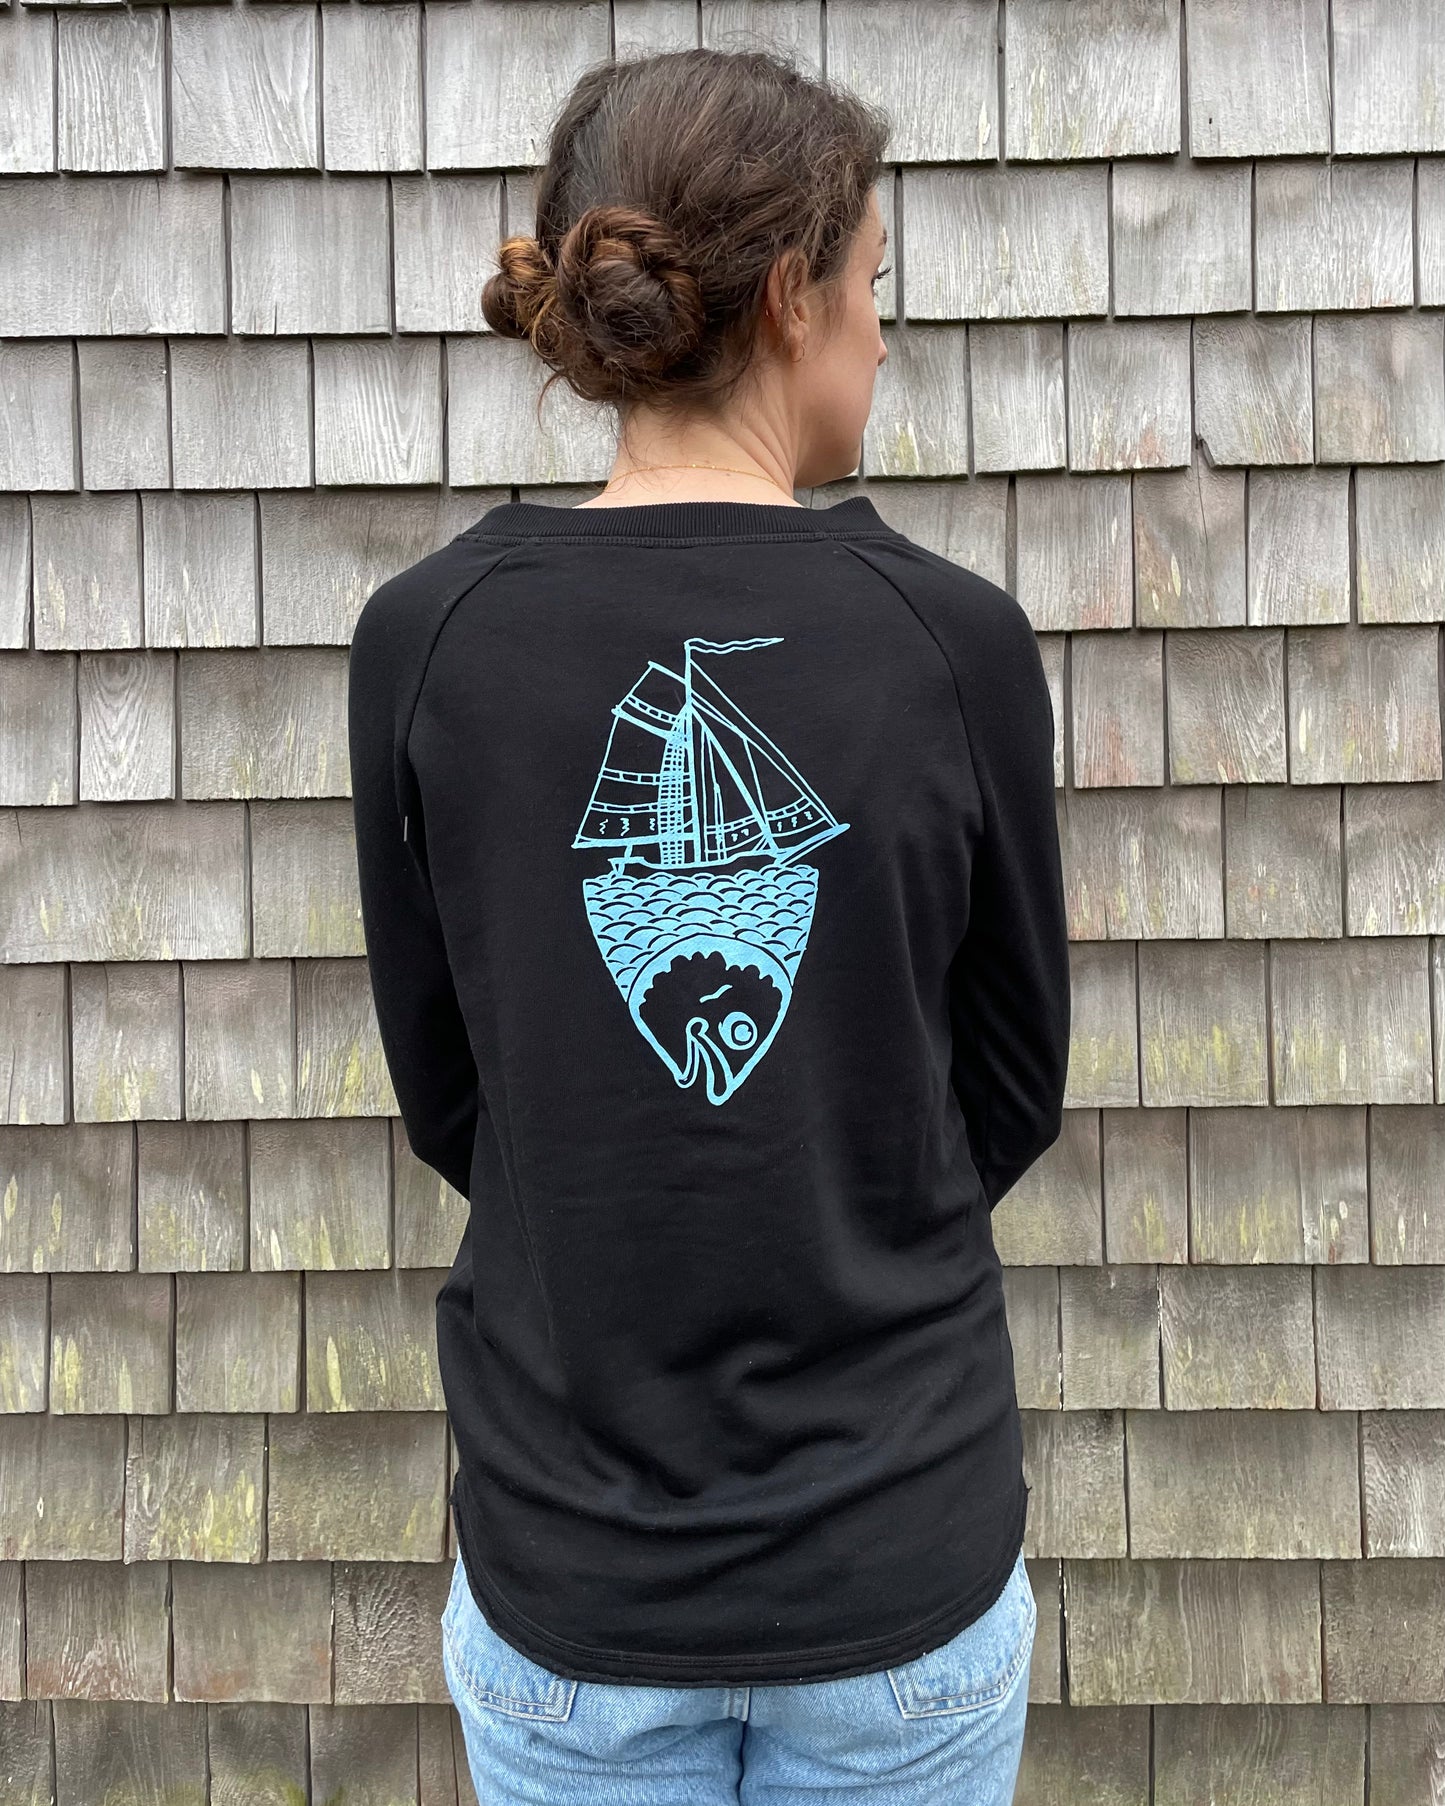 Life Comes in Waves Double Print Crew